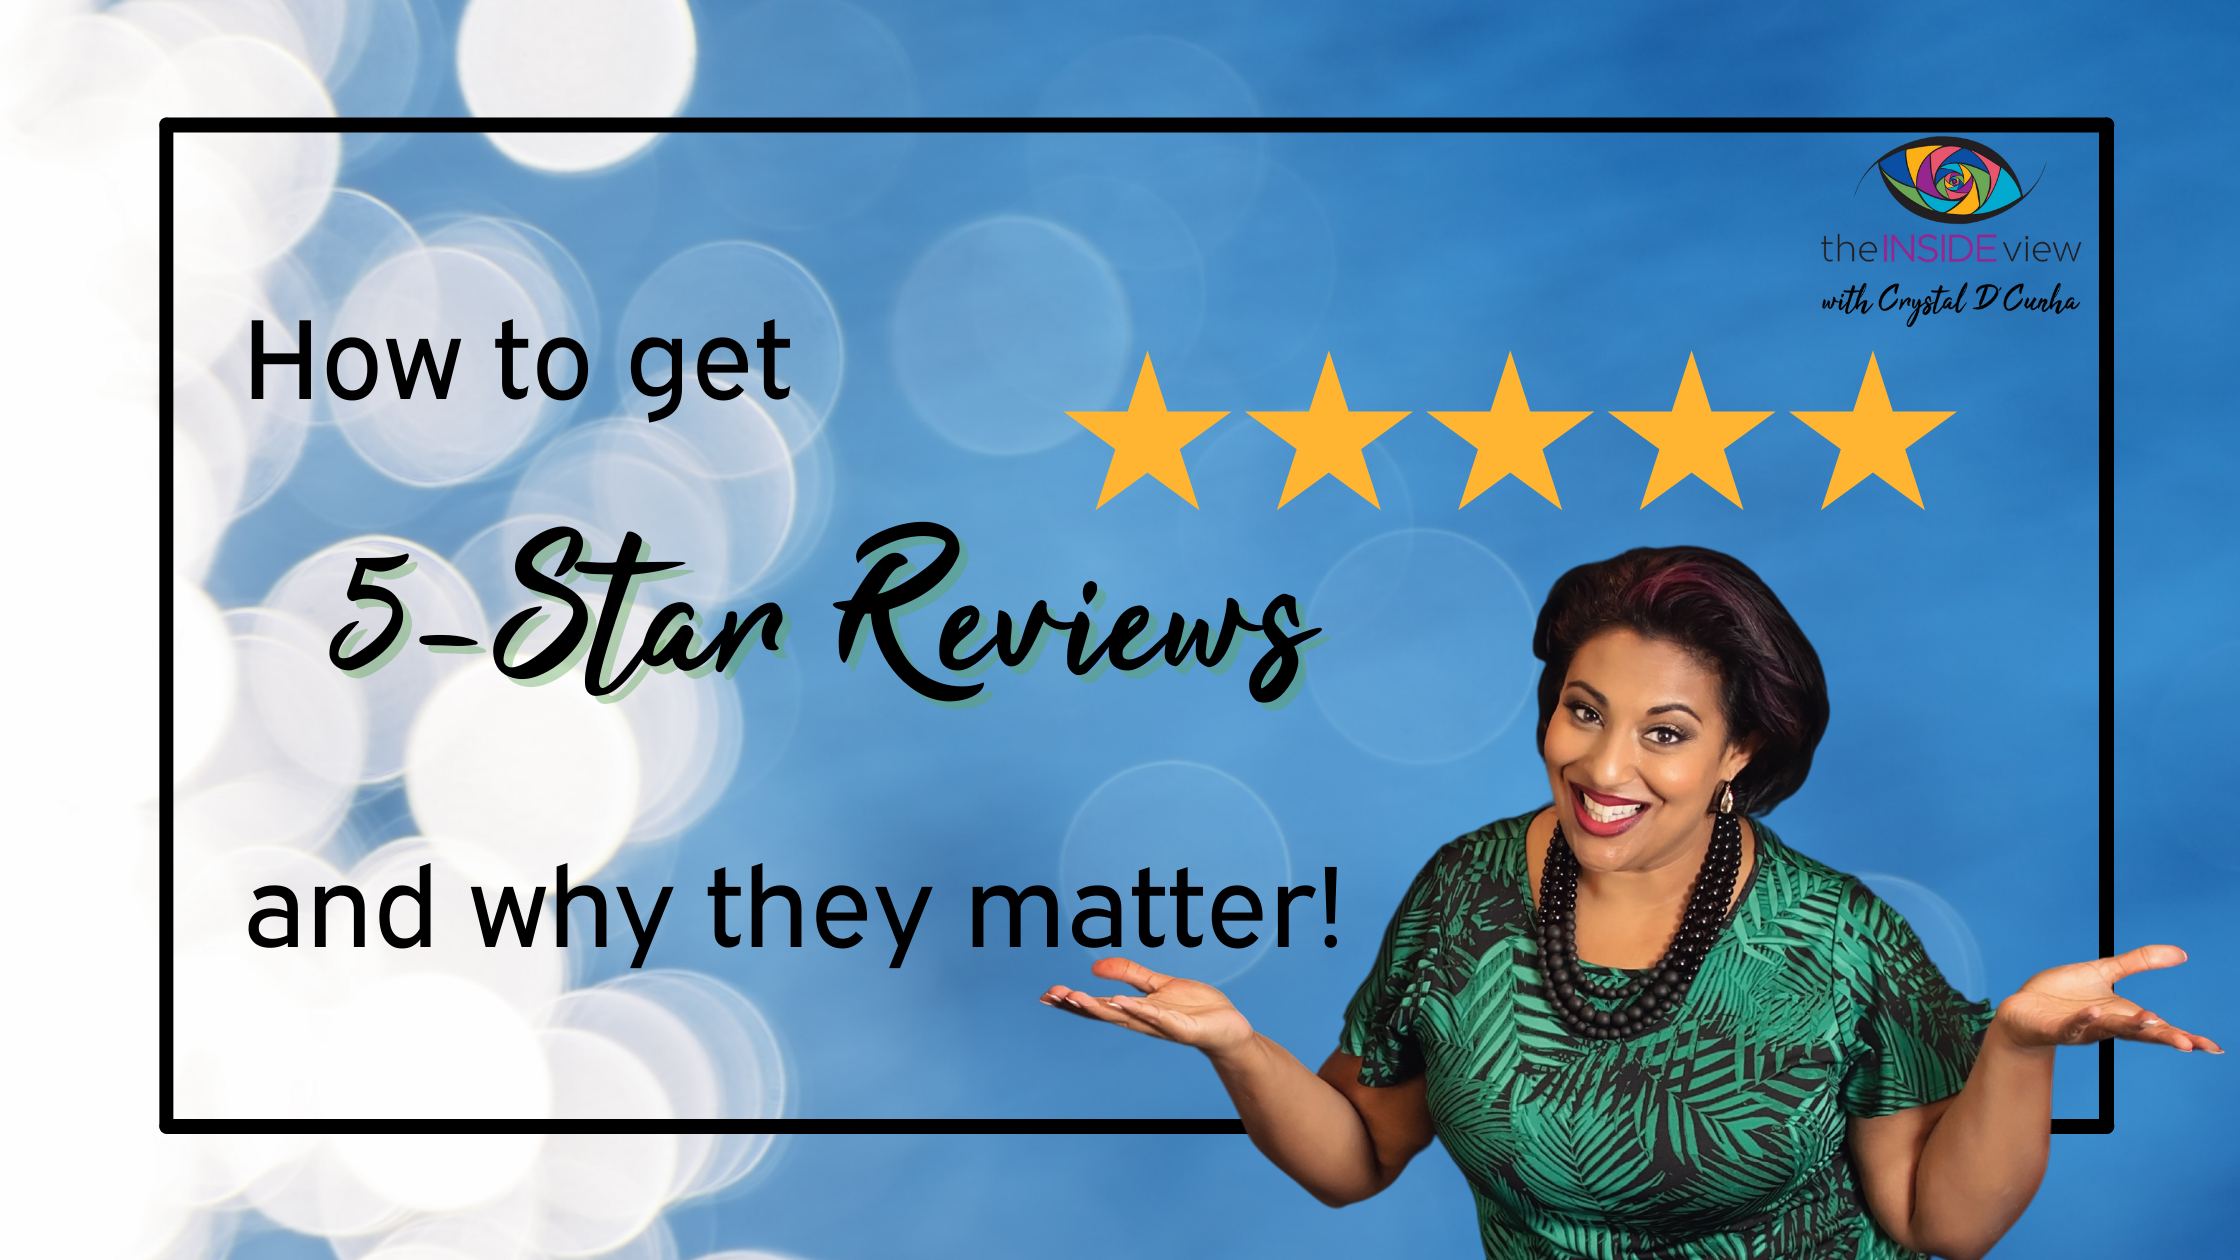 How to get 5-Star Reviews, and why they matter!